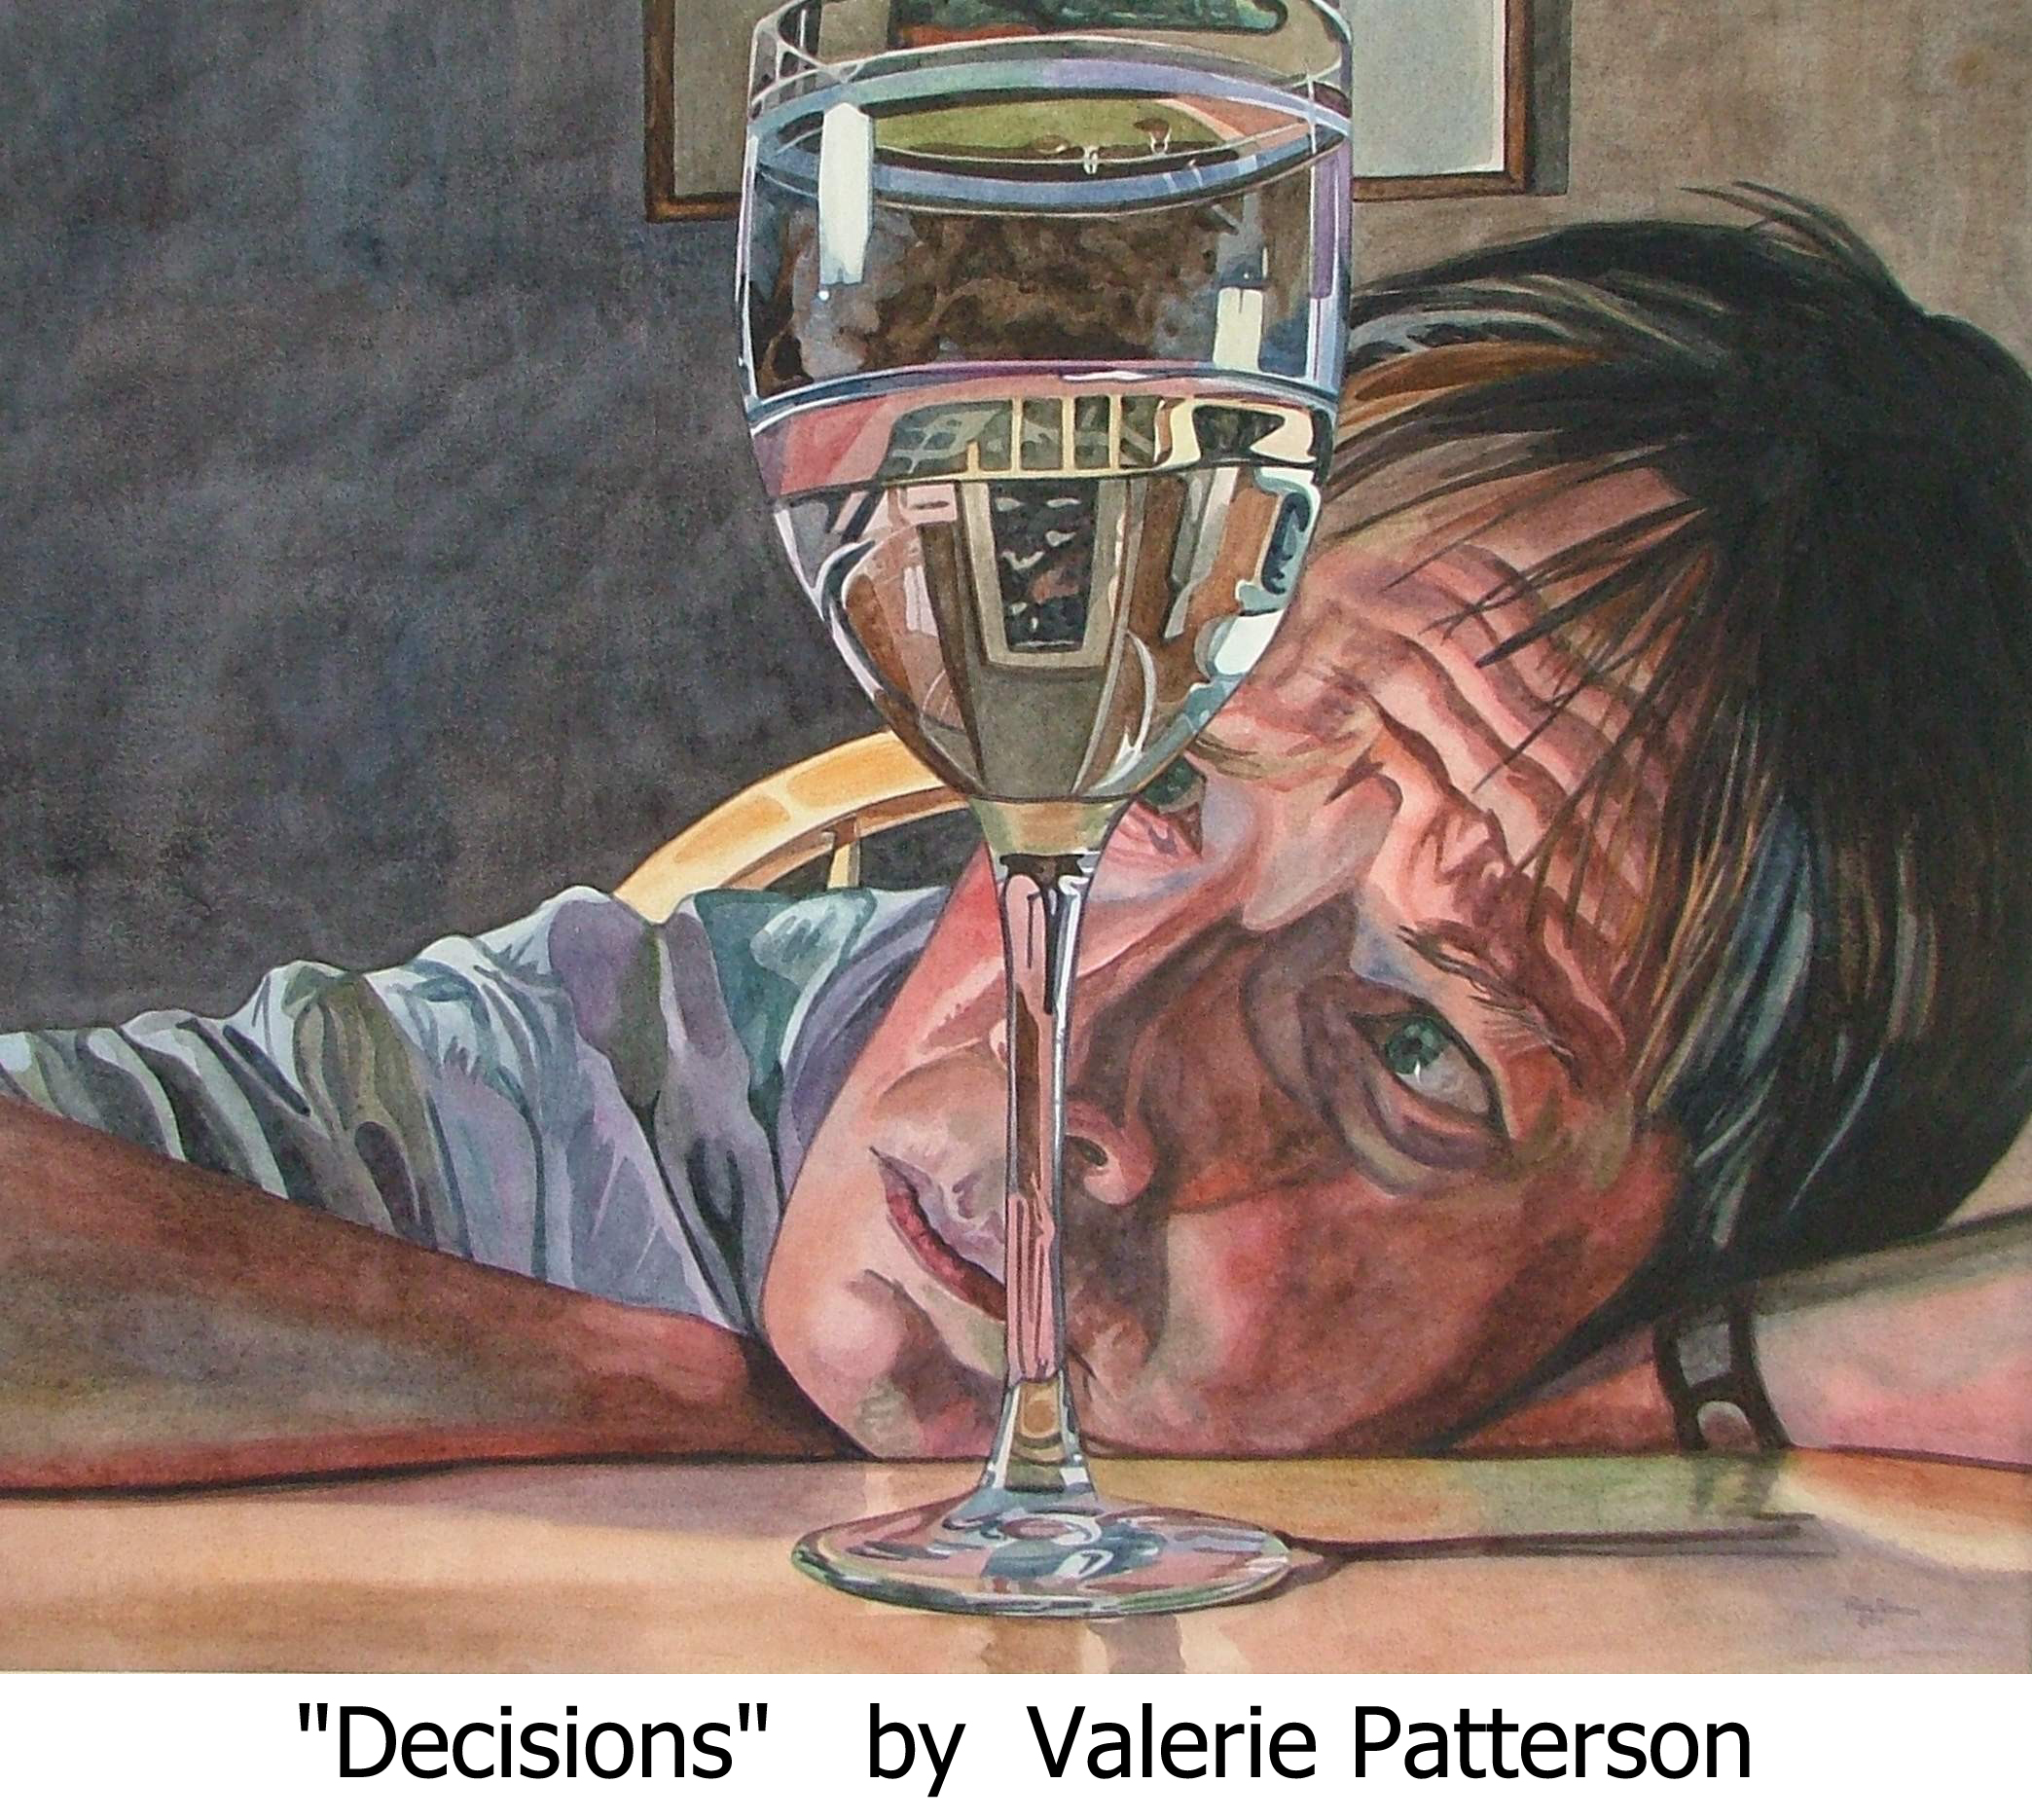 Decisions by Valerie Patterson